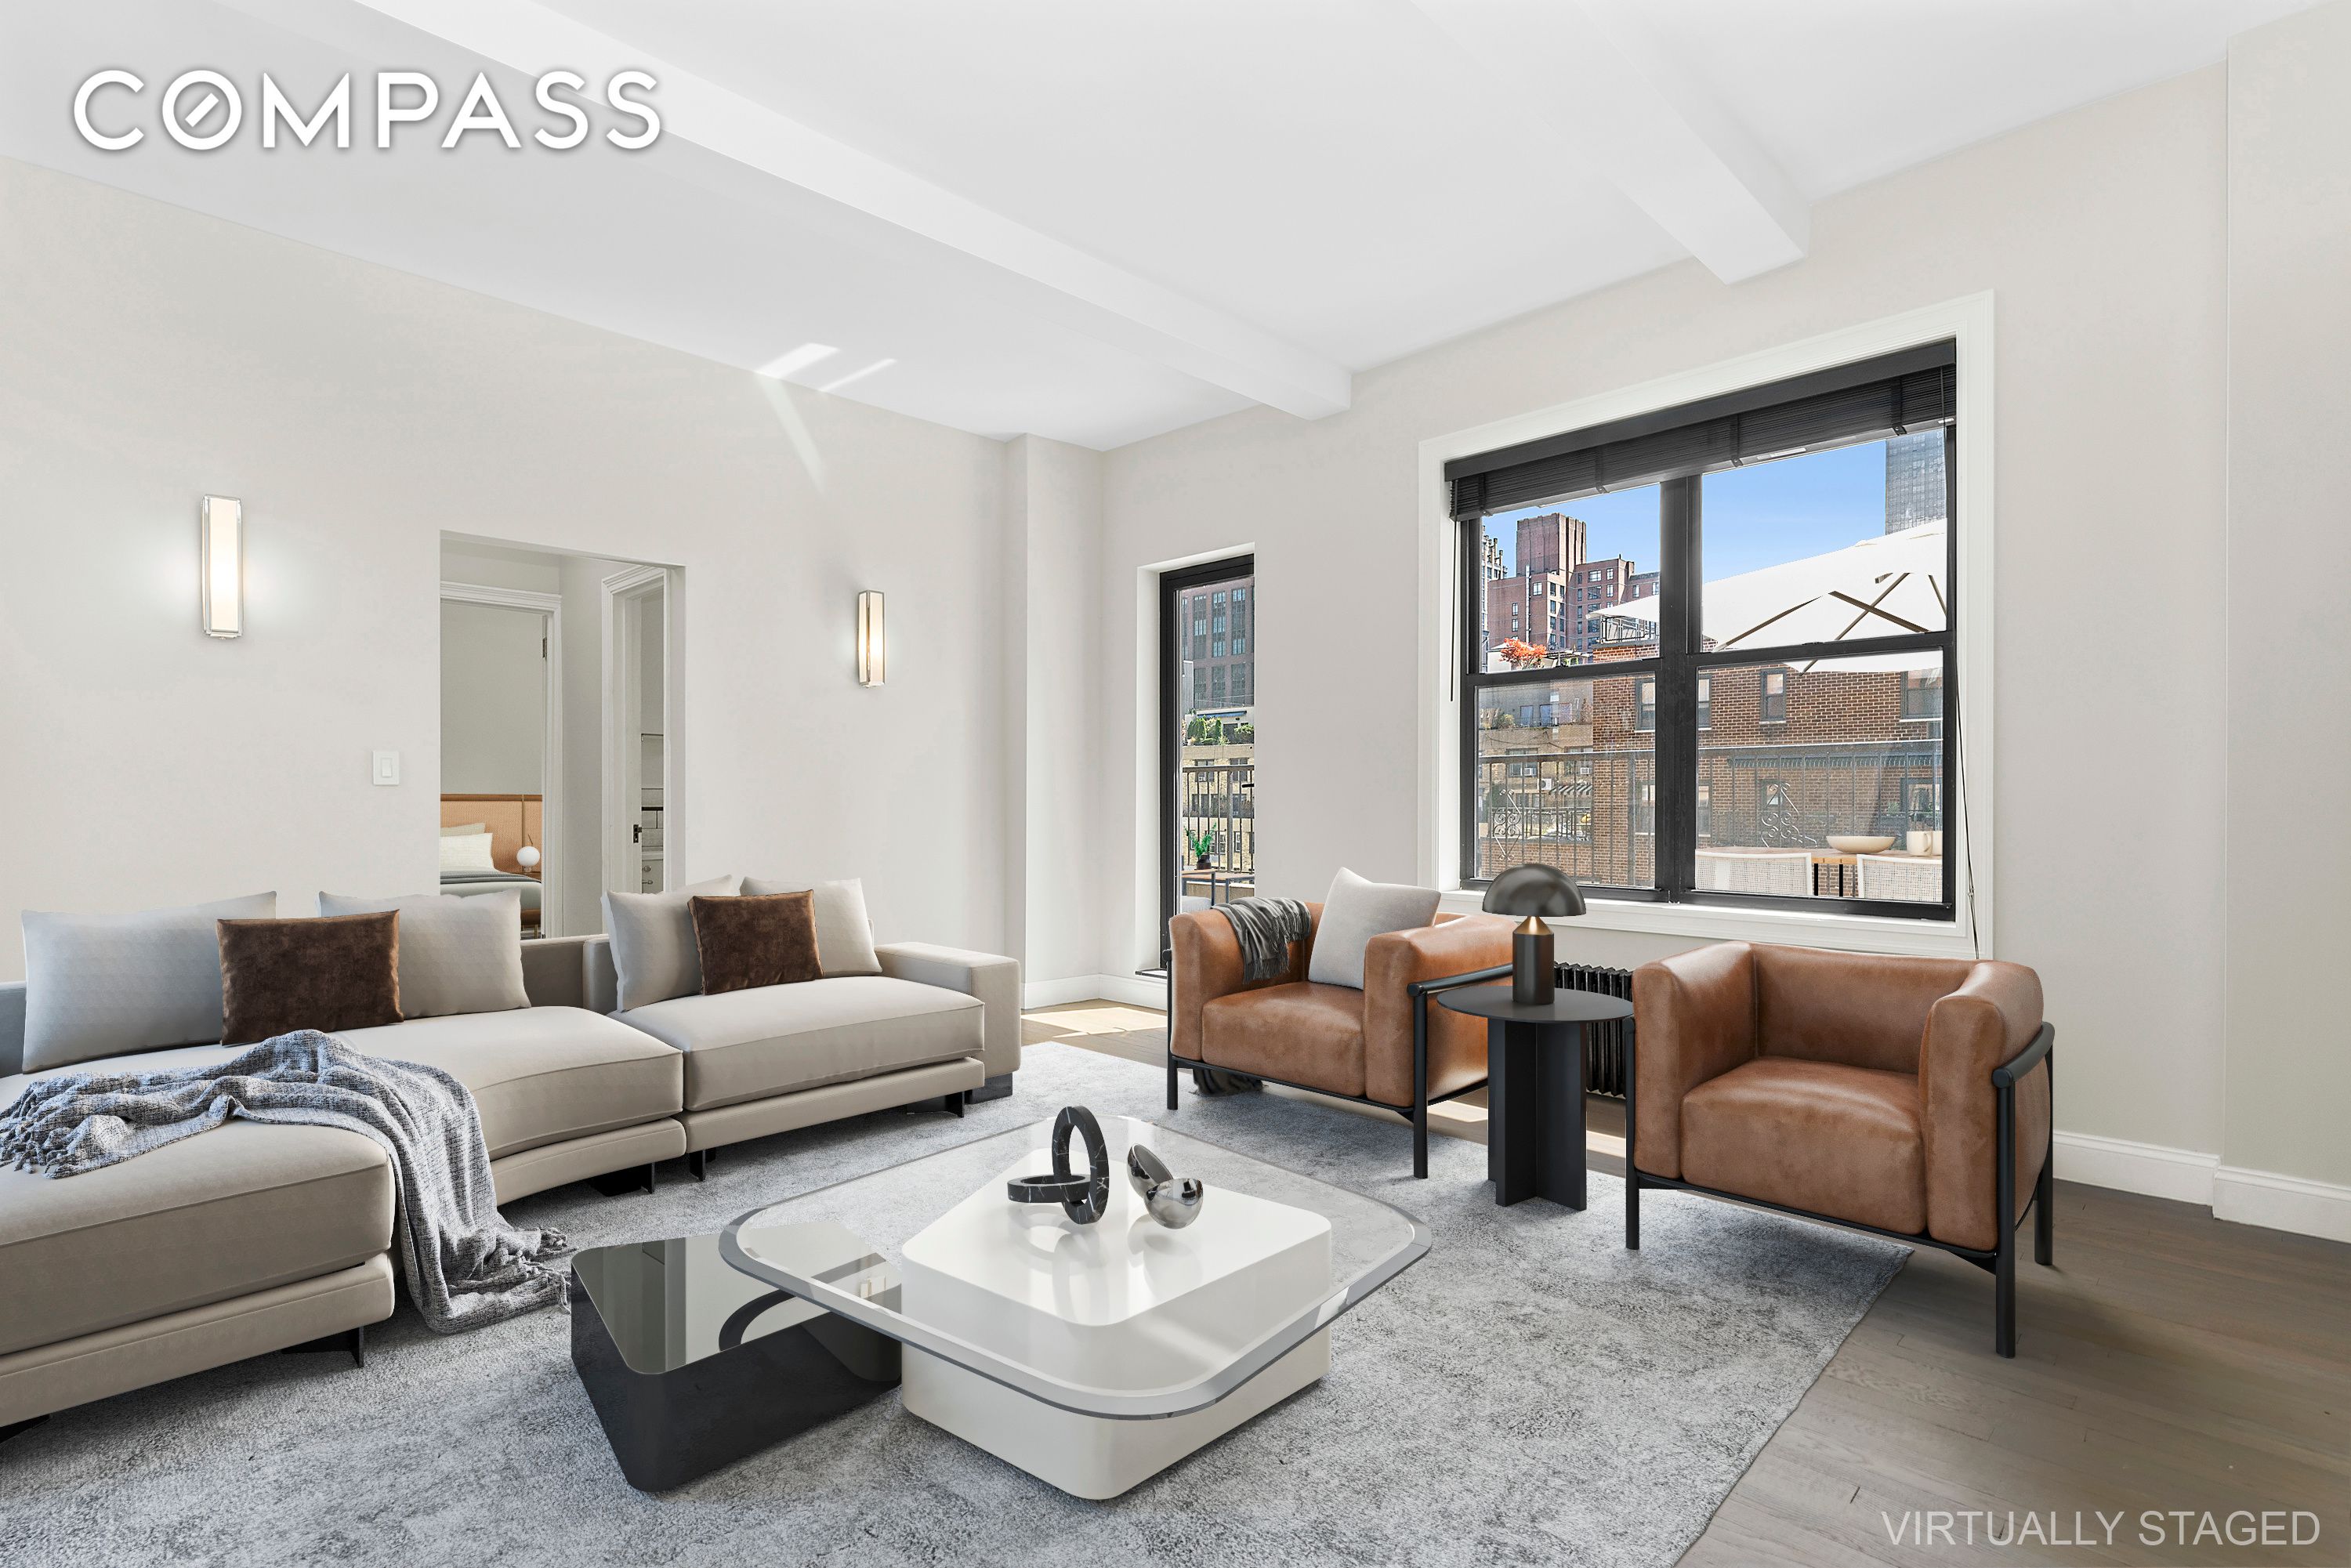 321 East 54th Street Phb, Sutton Place, Midtown East, NYC - 1 Bedrooms  
1 Bathrooms  
3 Rooms - 